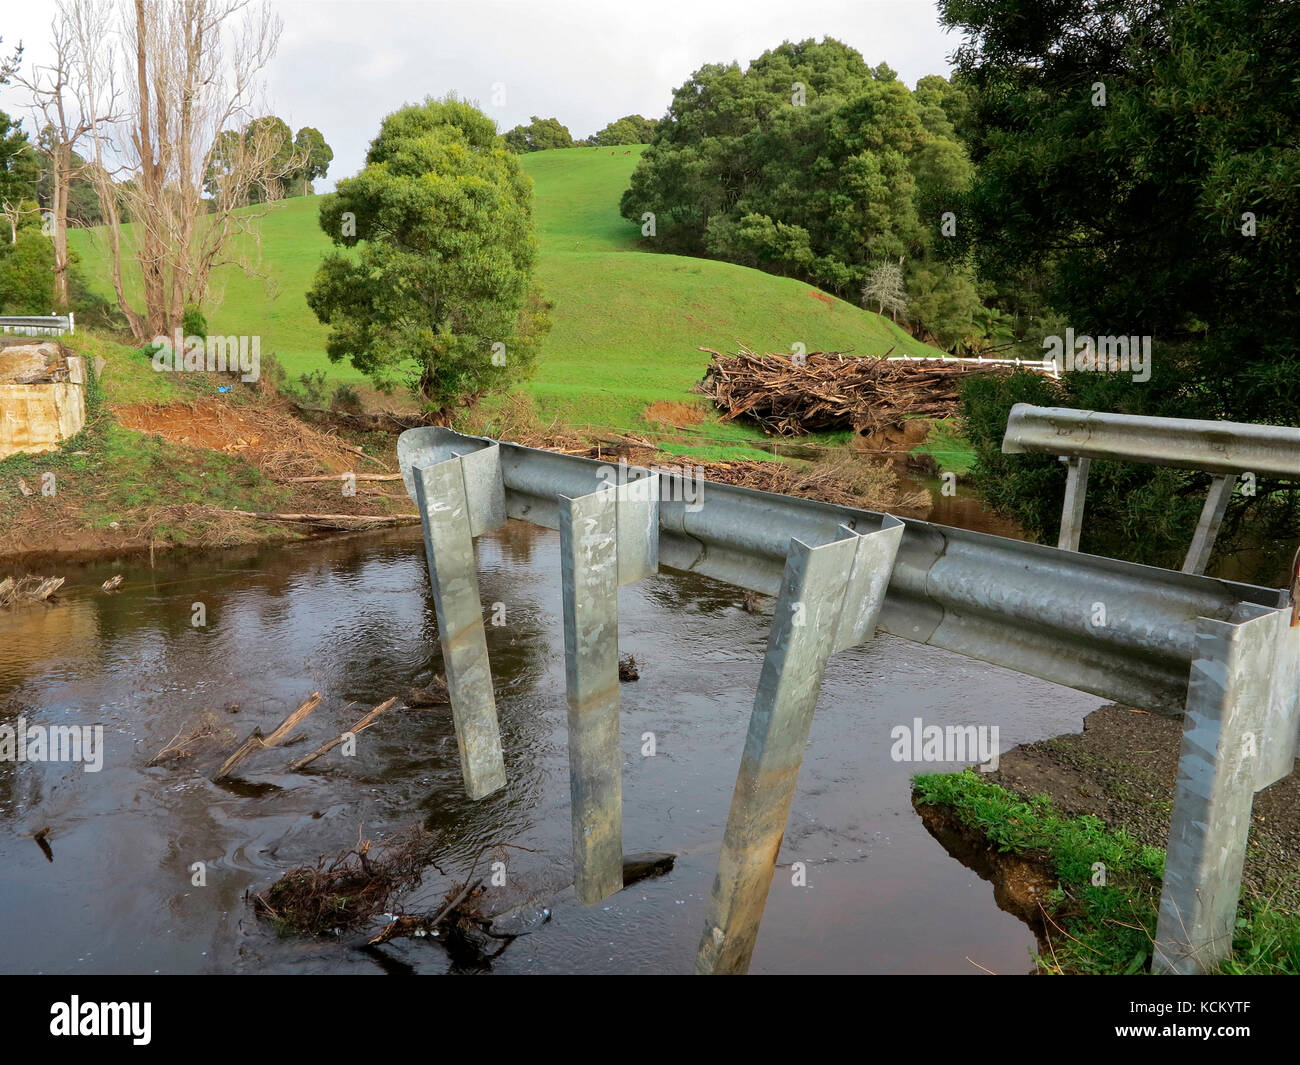 Bridge on the Flowerdale River damaged by flood, washed away into nearby pasture beneath the weight of debris. Lapoinya, Tasmania, Australia Stock Photo